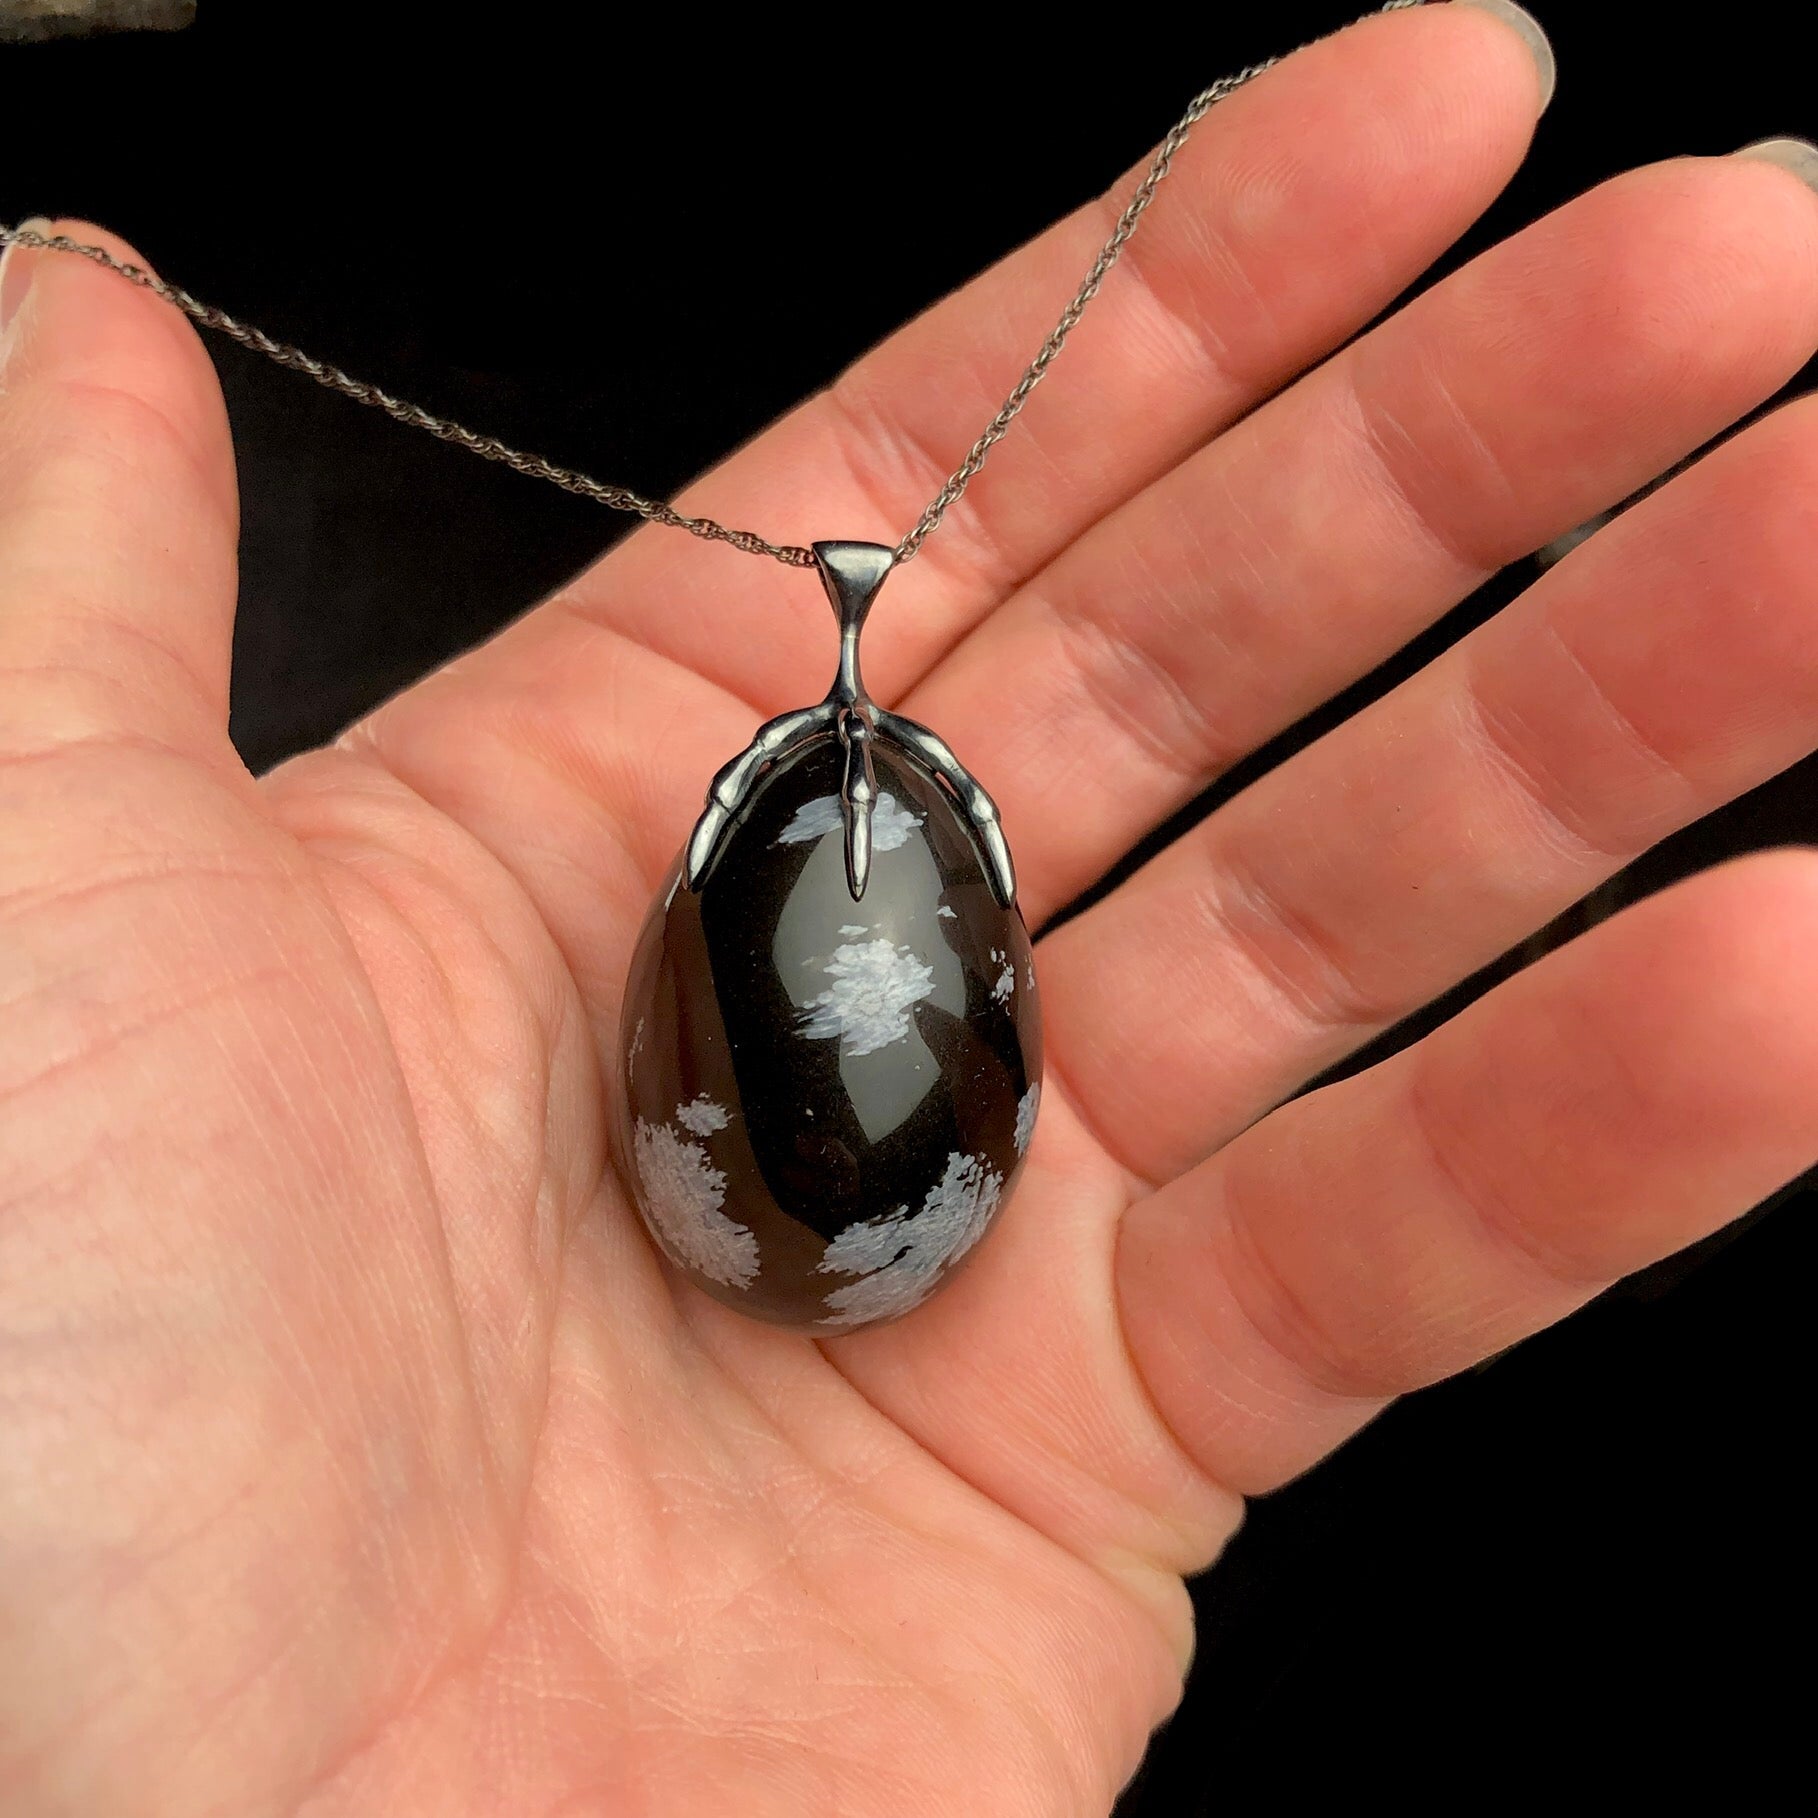 Black Egg Shaped stone held by a bird claw on black chain shown in hand